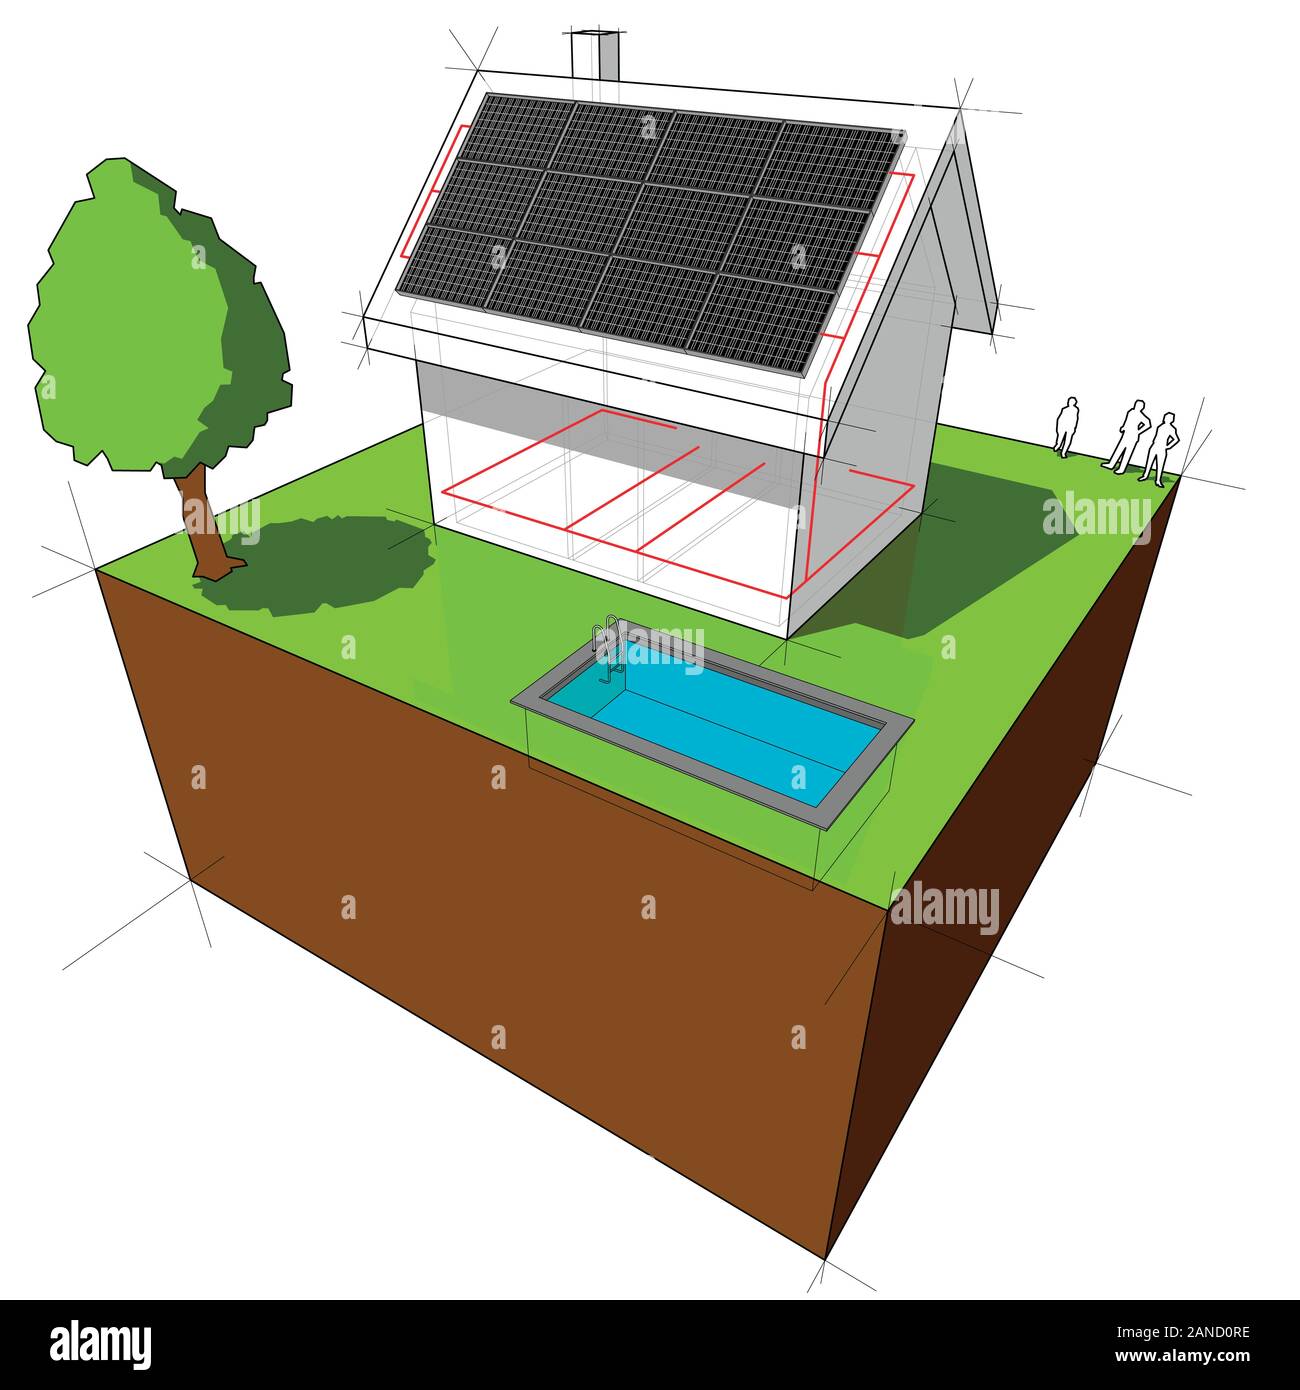 diagram of a simple detached house with photovoltaic panels on the roof and simplified diagram of cabes inside the house and swimming pool Stock Vector